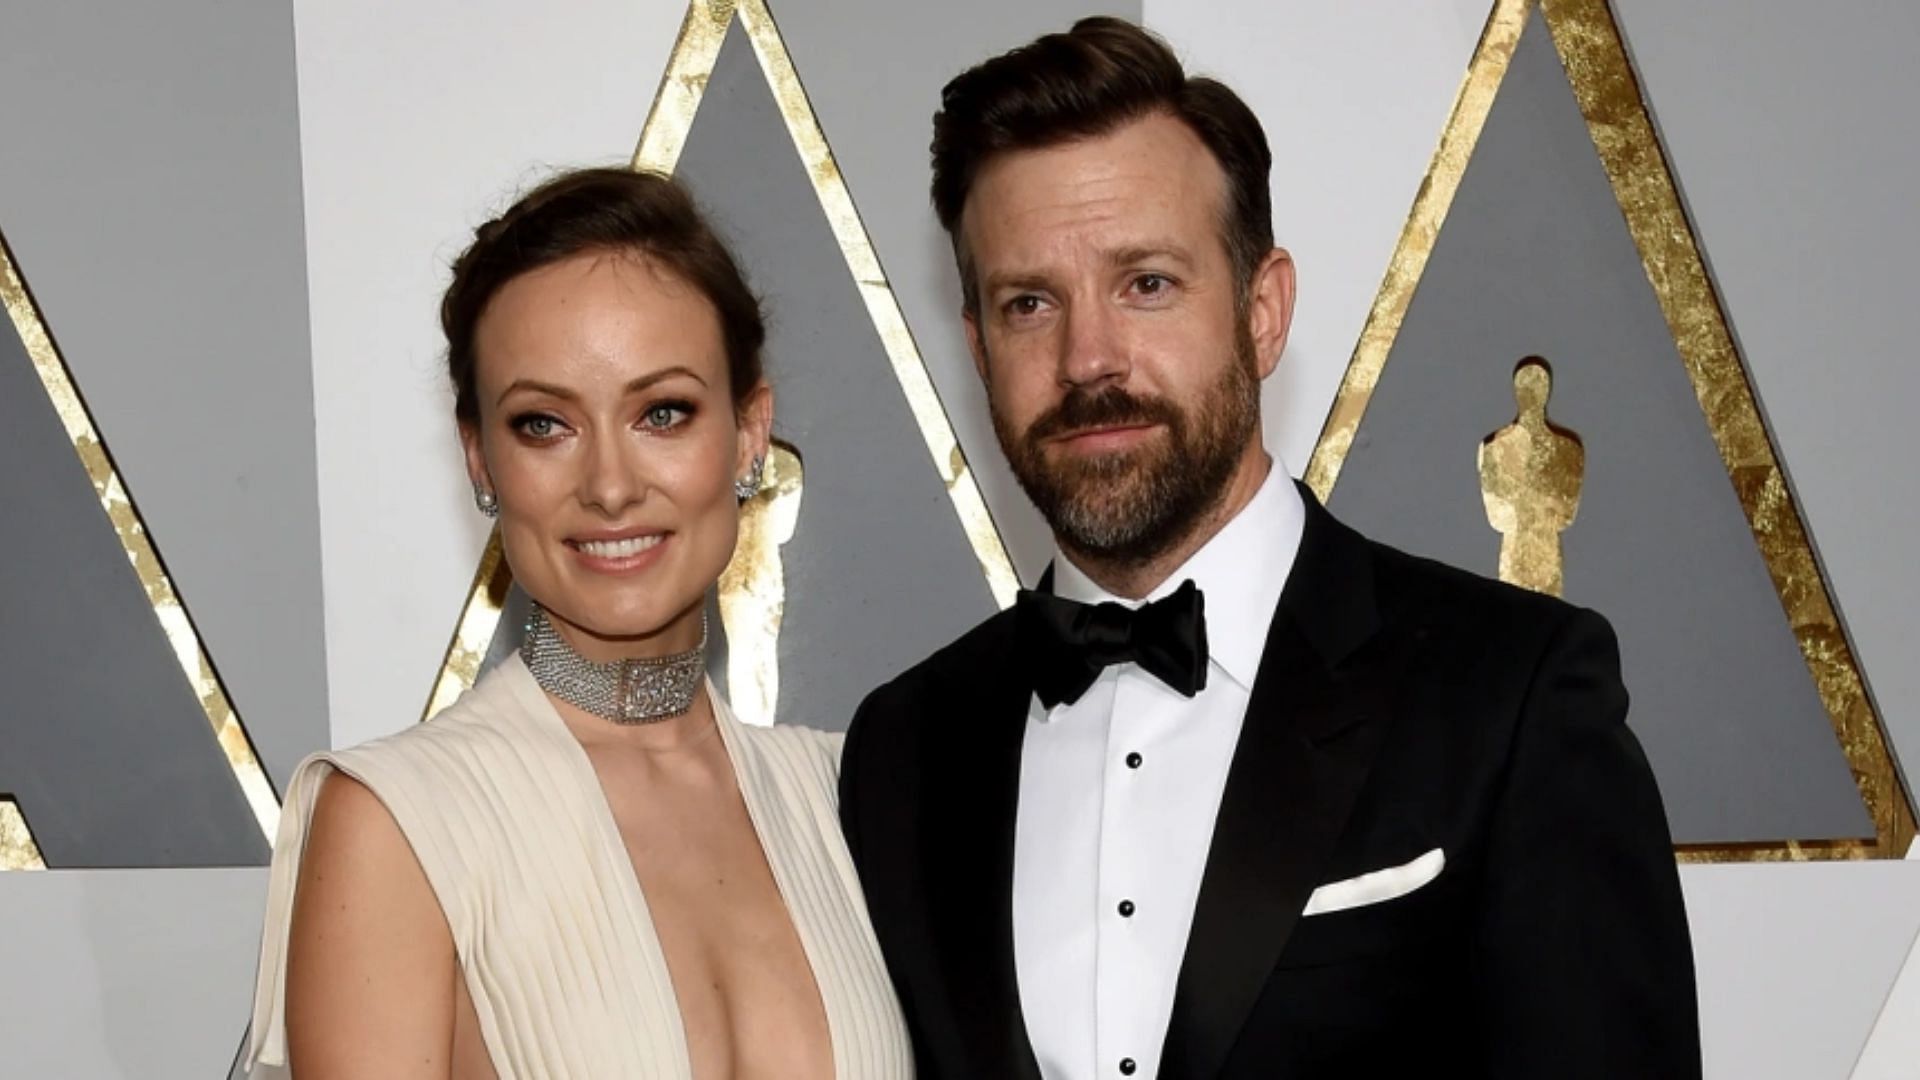 Jason Sudeikis and Olivia Wilde have two kids. (Image via Getty Images/Ethan Miller)